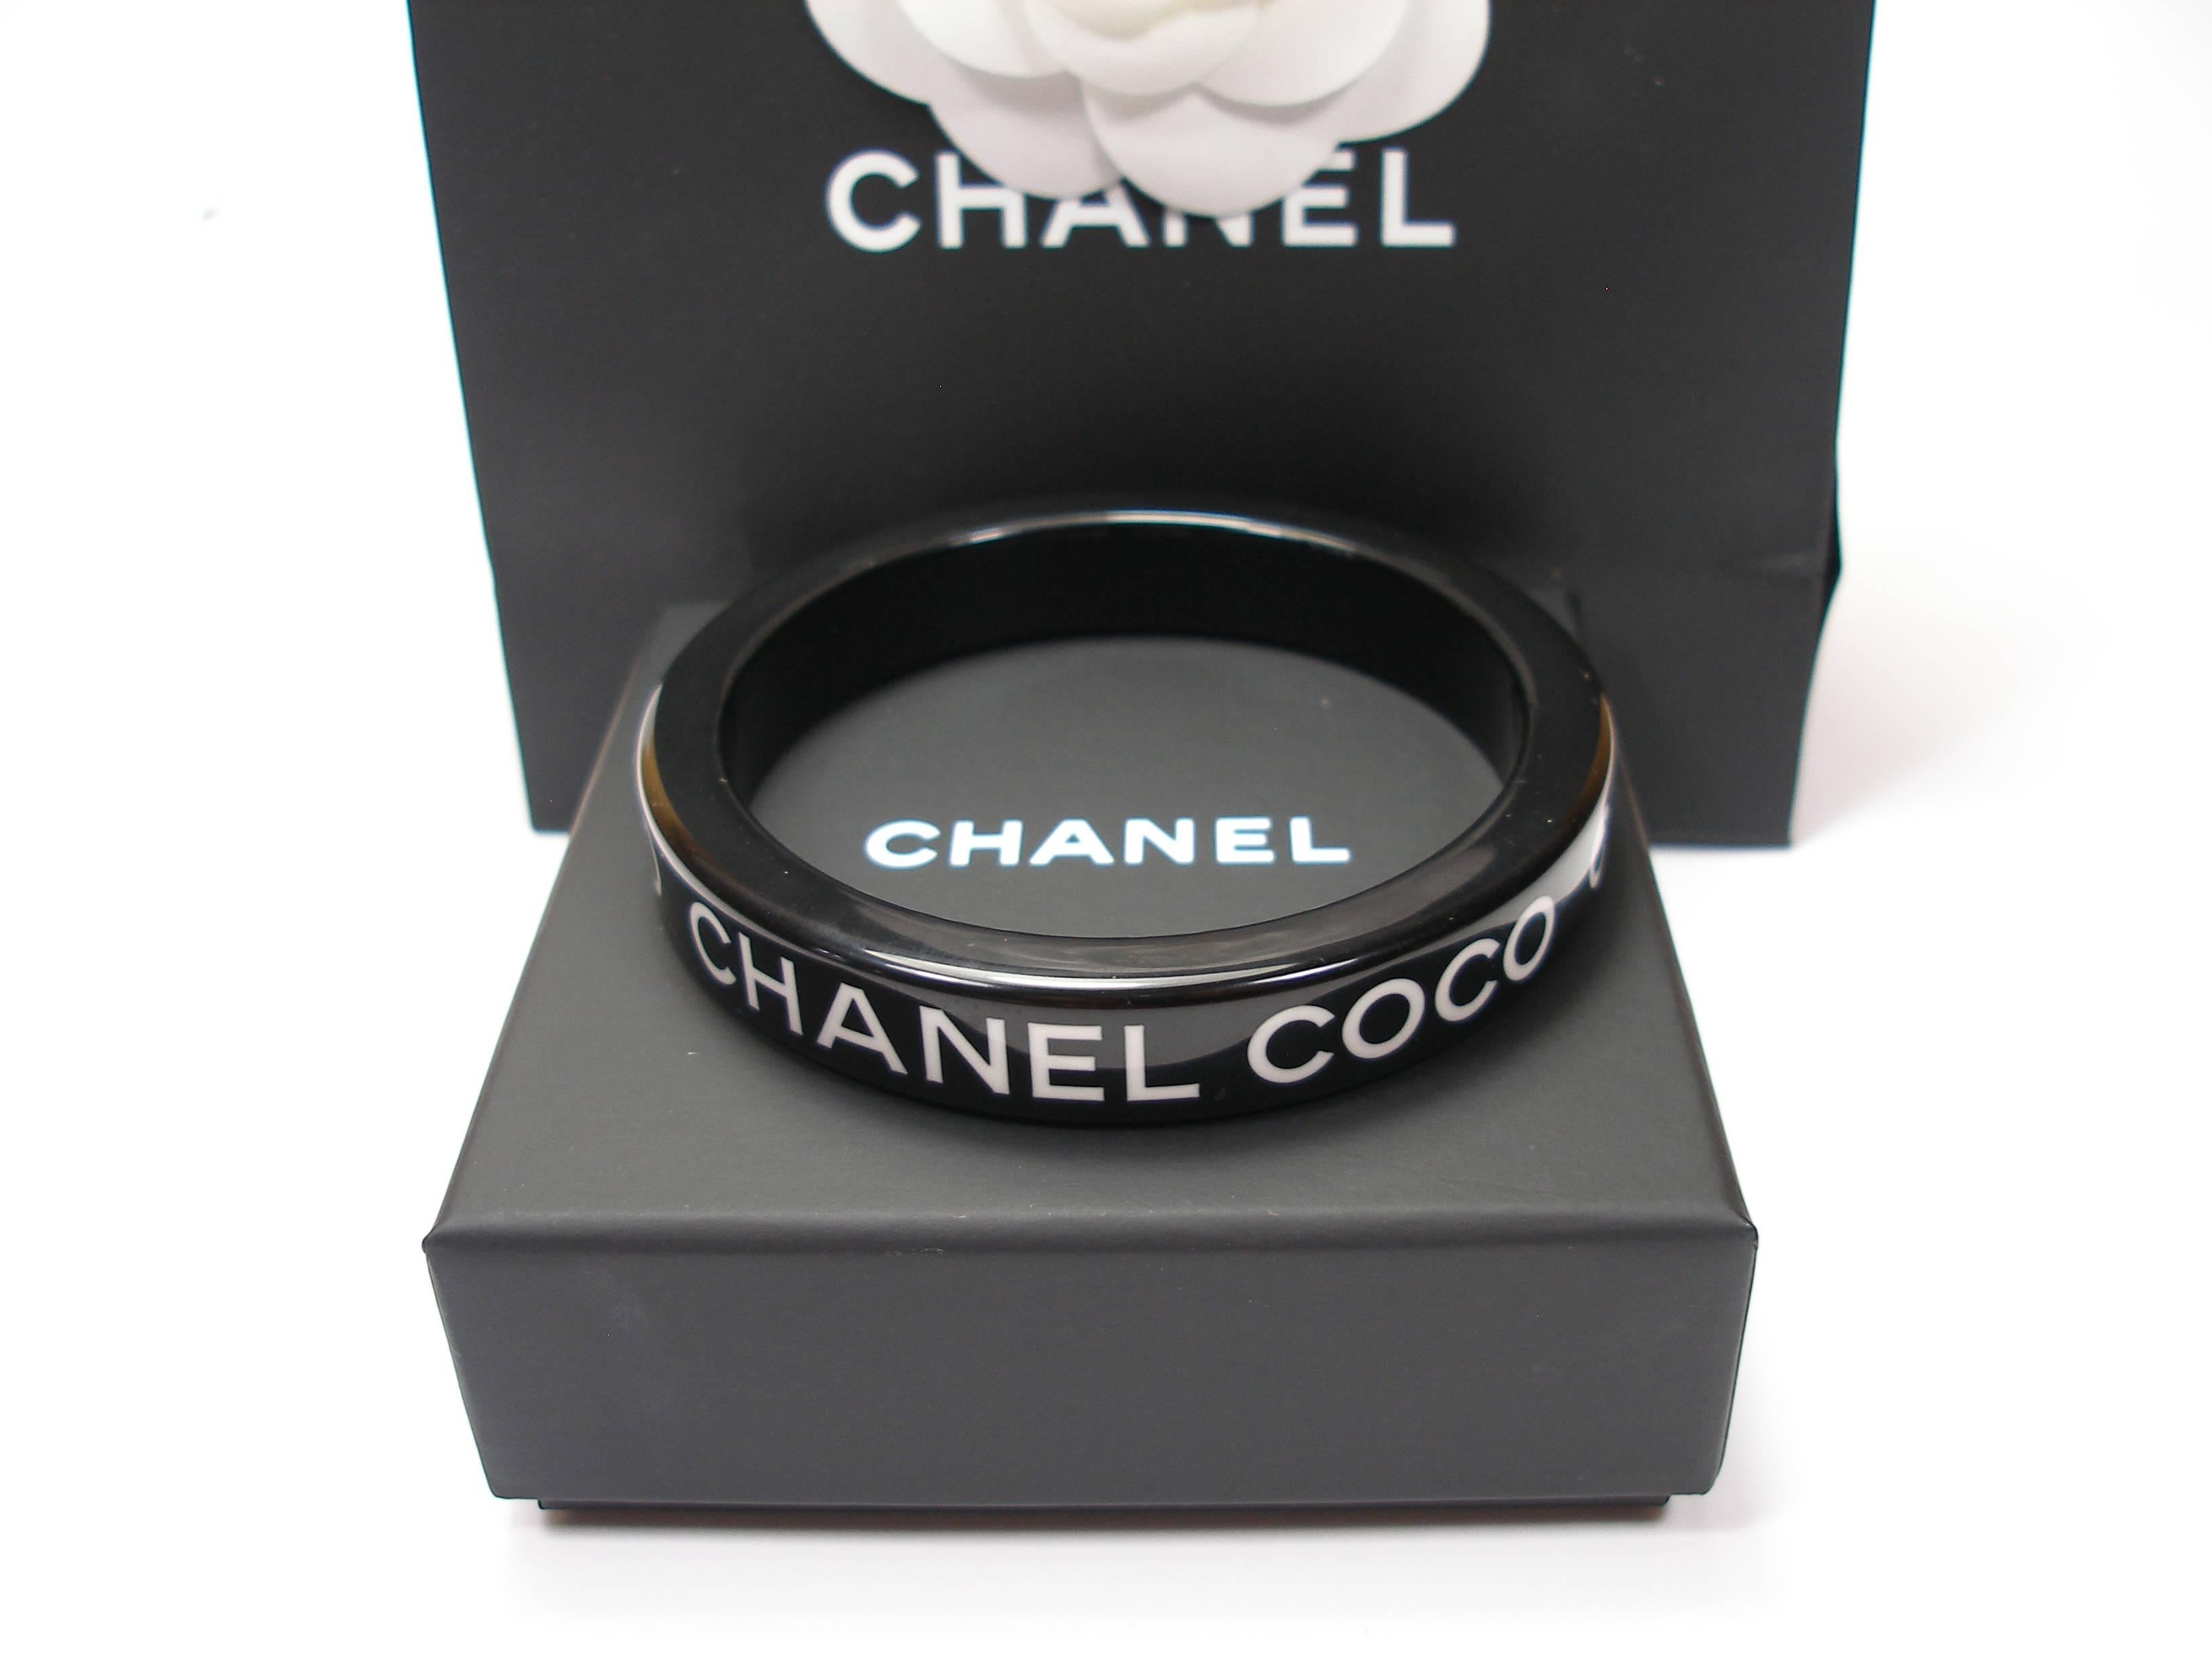 Difficulte to find 
Classique Bracelet Bangle
COCO CHANEL 
Résine Black and White 
Diameter inside 6.5 cm / Large Size
Width : 1.2cm
Stamp  inside : 10ccA Chanel Made in France
Good condition
Some micro scratches of use 
Customes fees and vat are